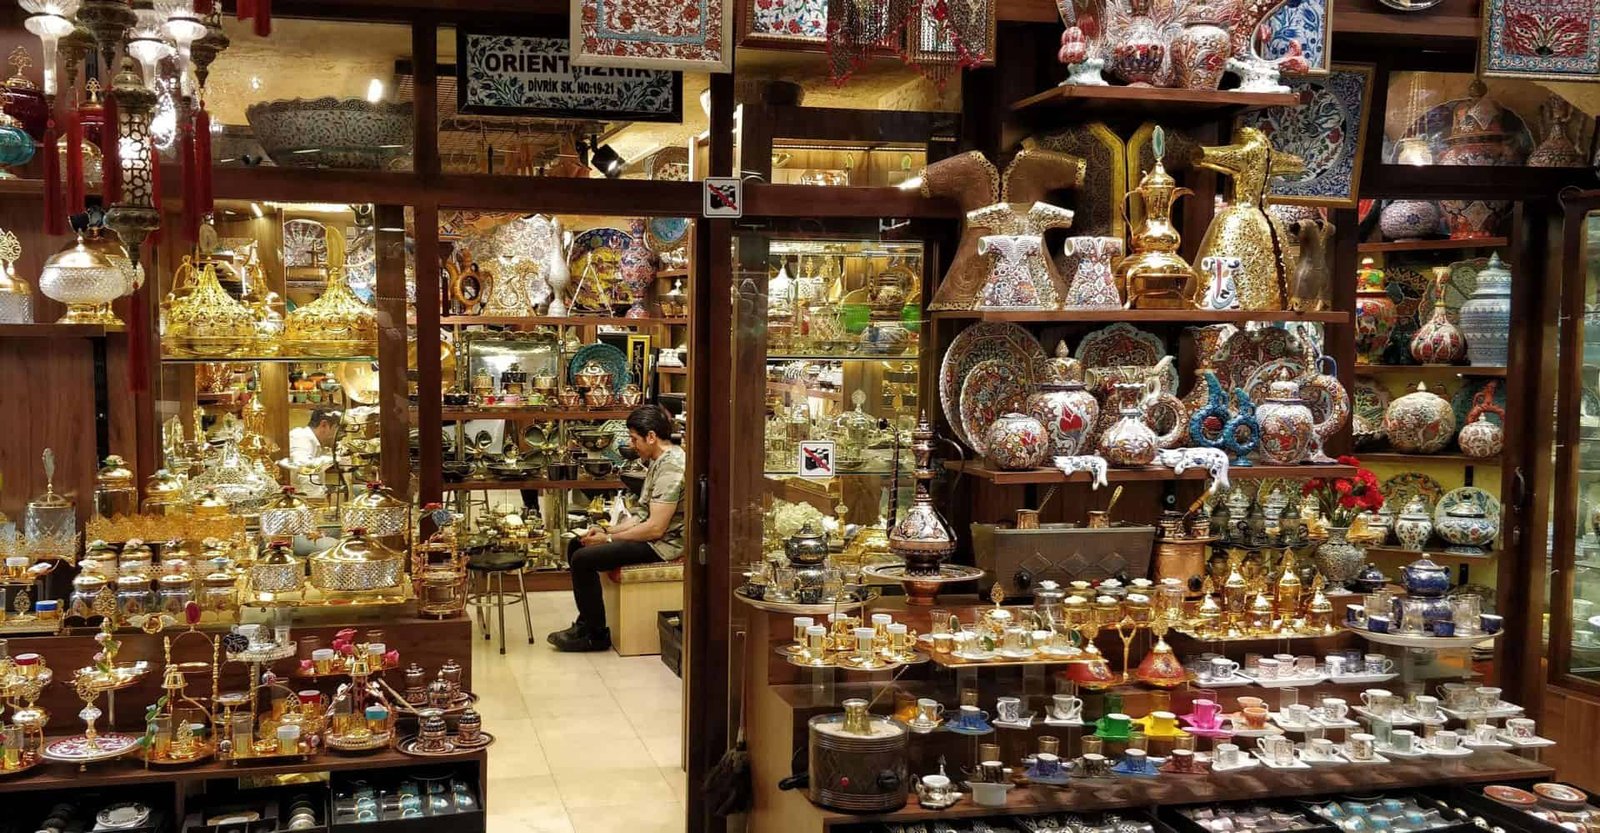 Shop selling authentic Turkish items